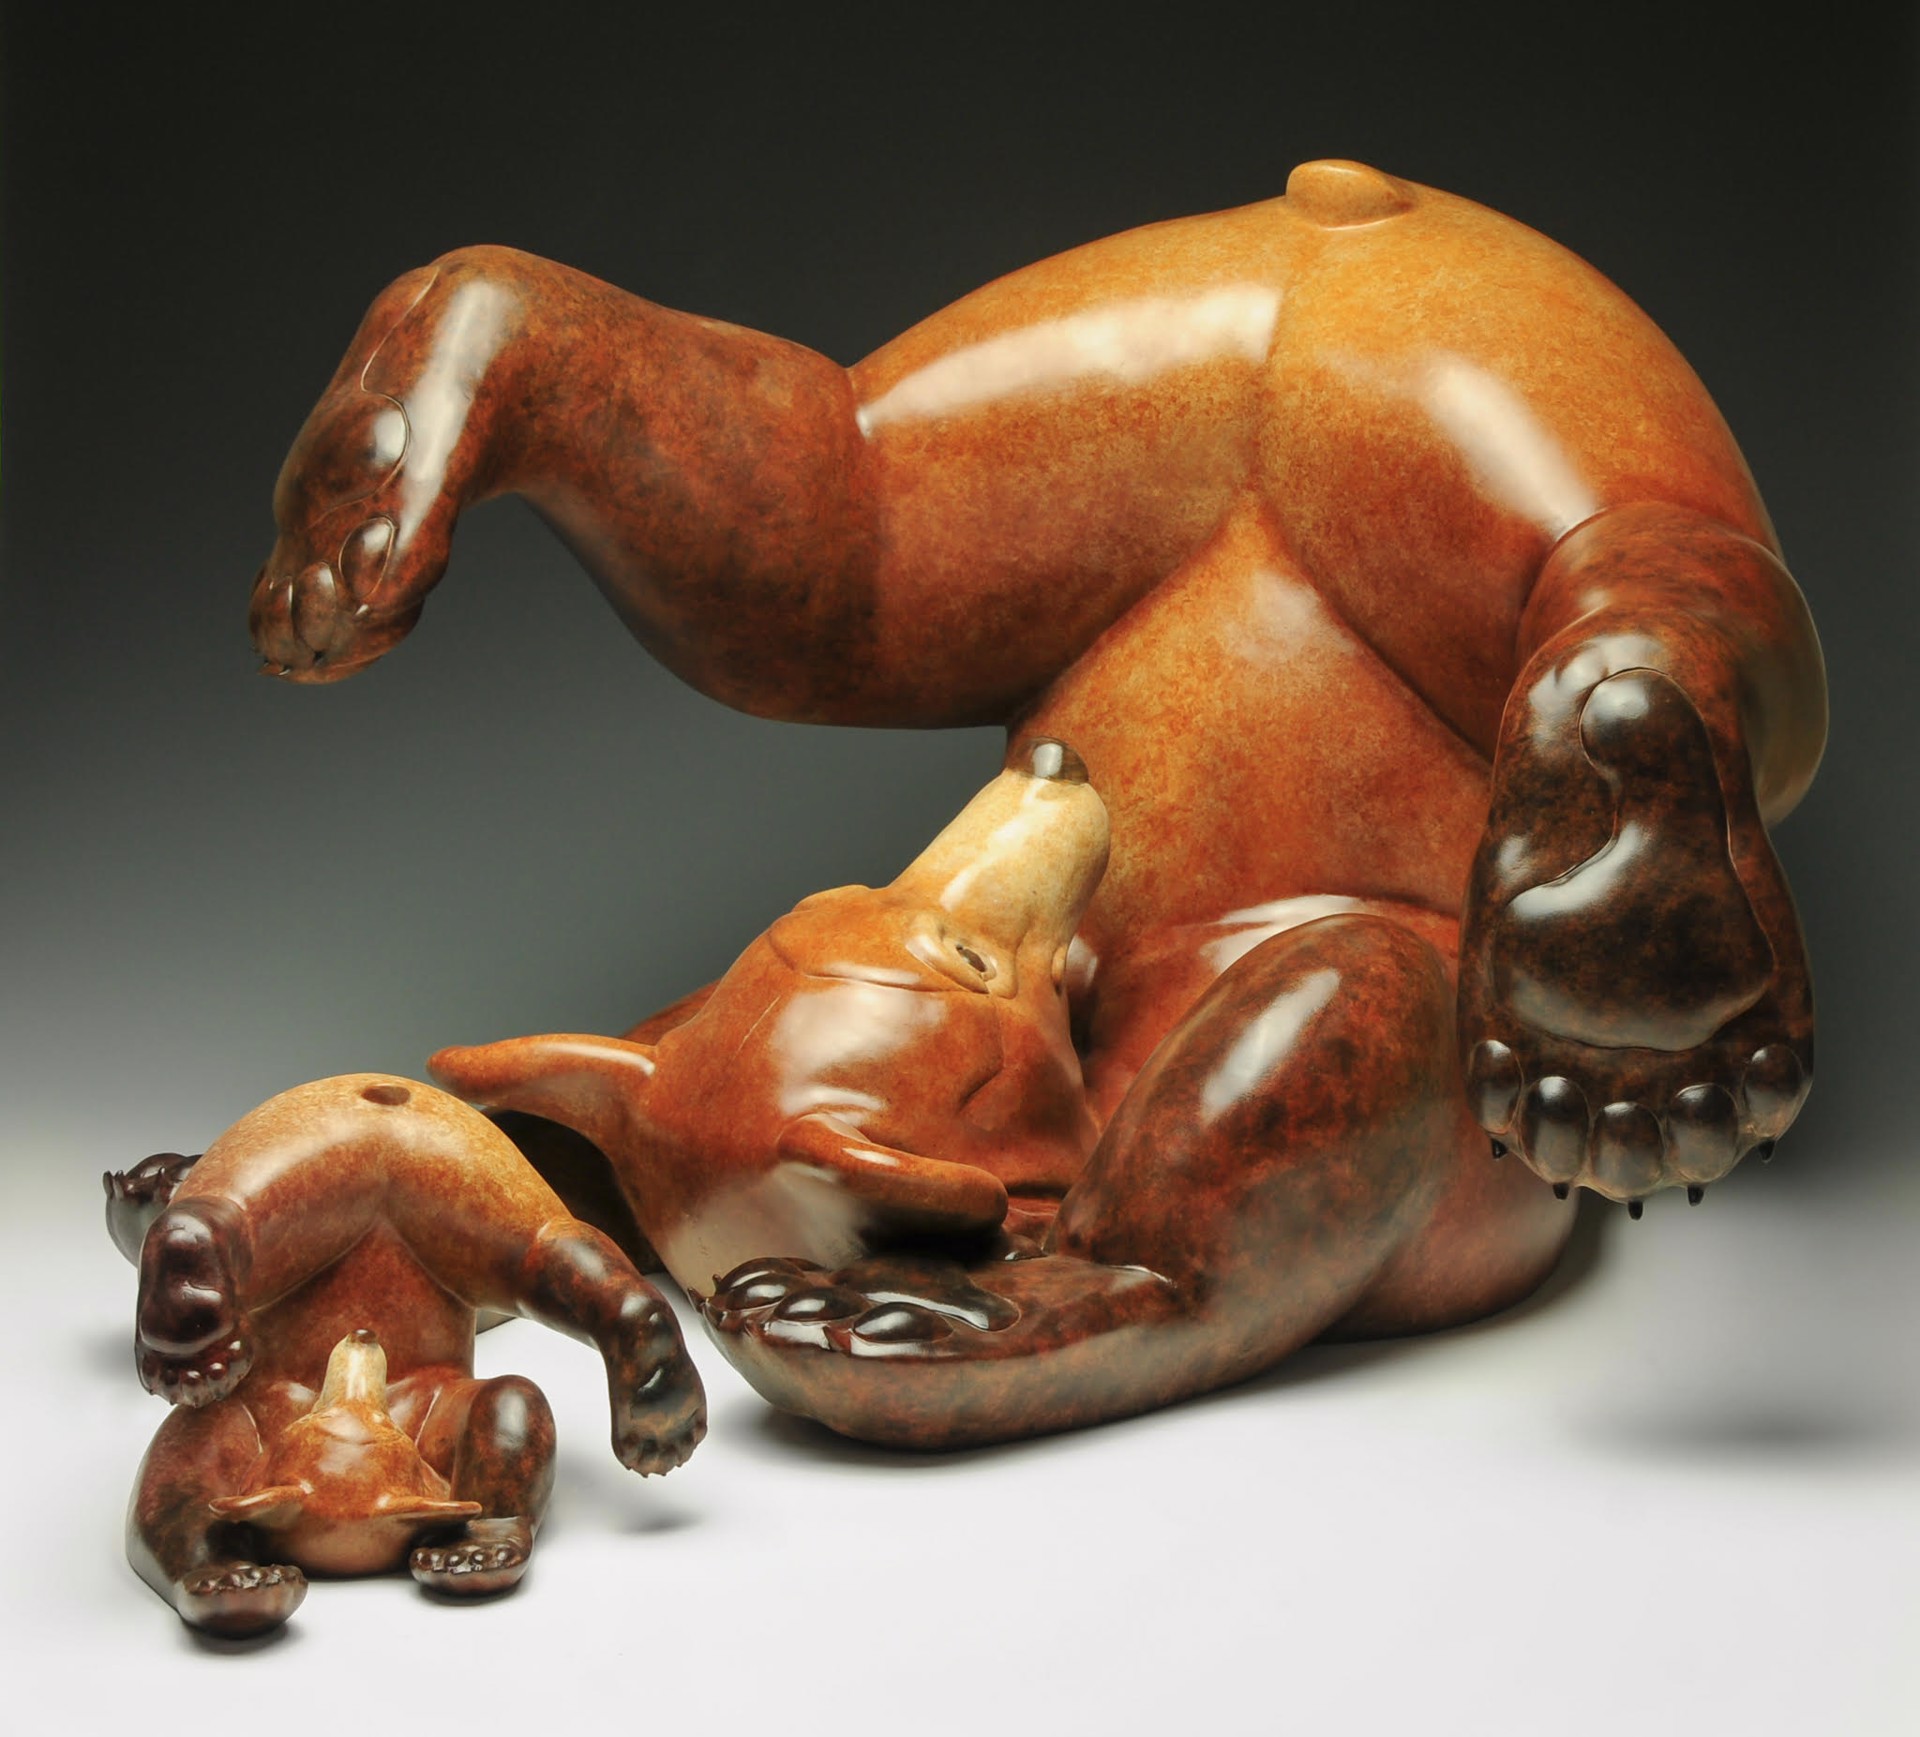 Bronze Sculpture Featuring A Somersaulting Grizzly Bear Cub